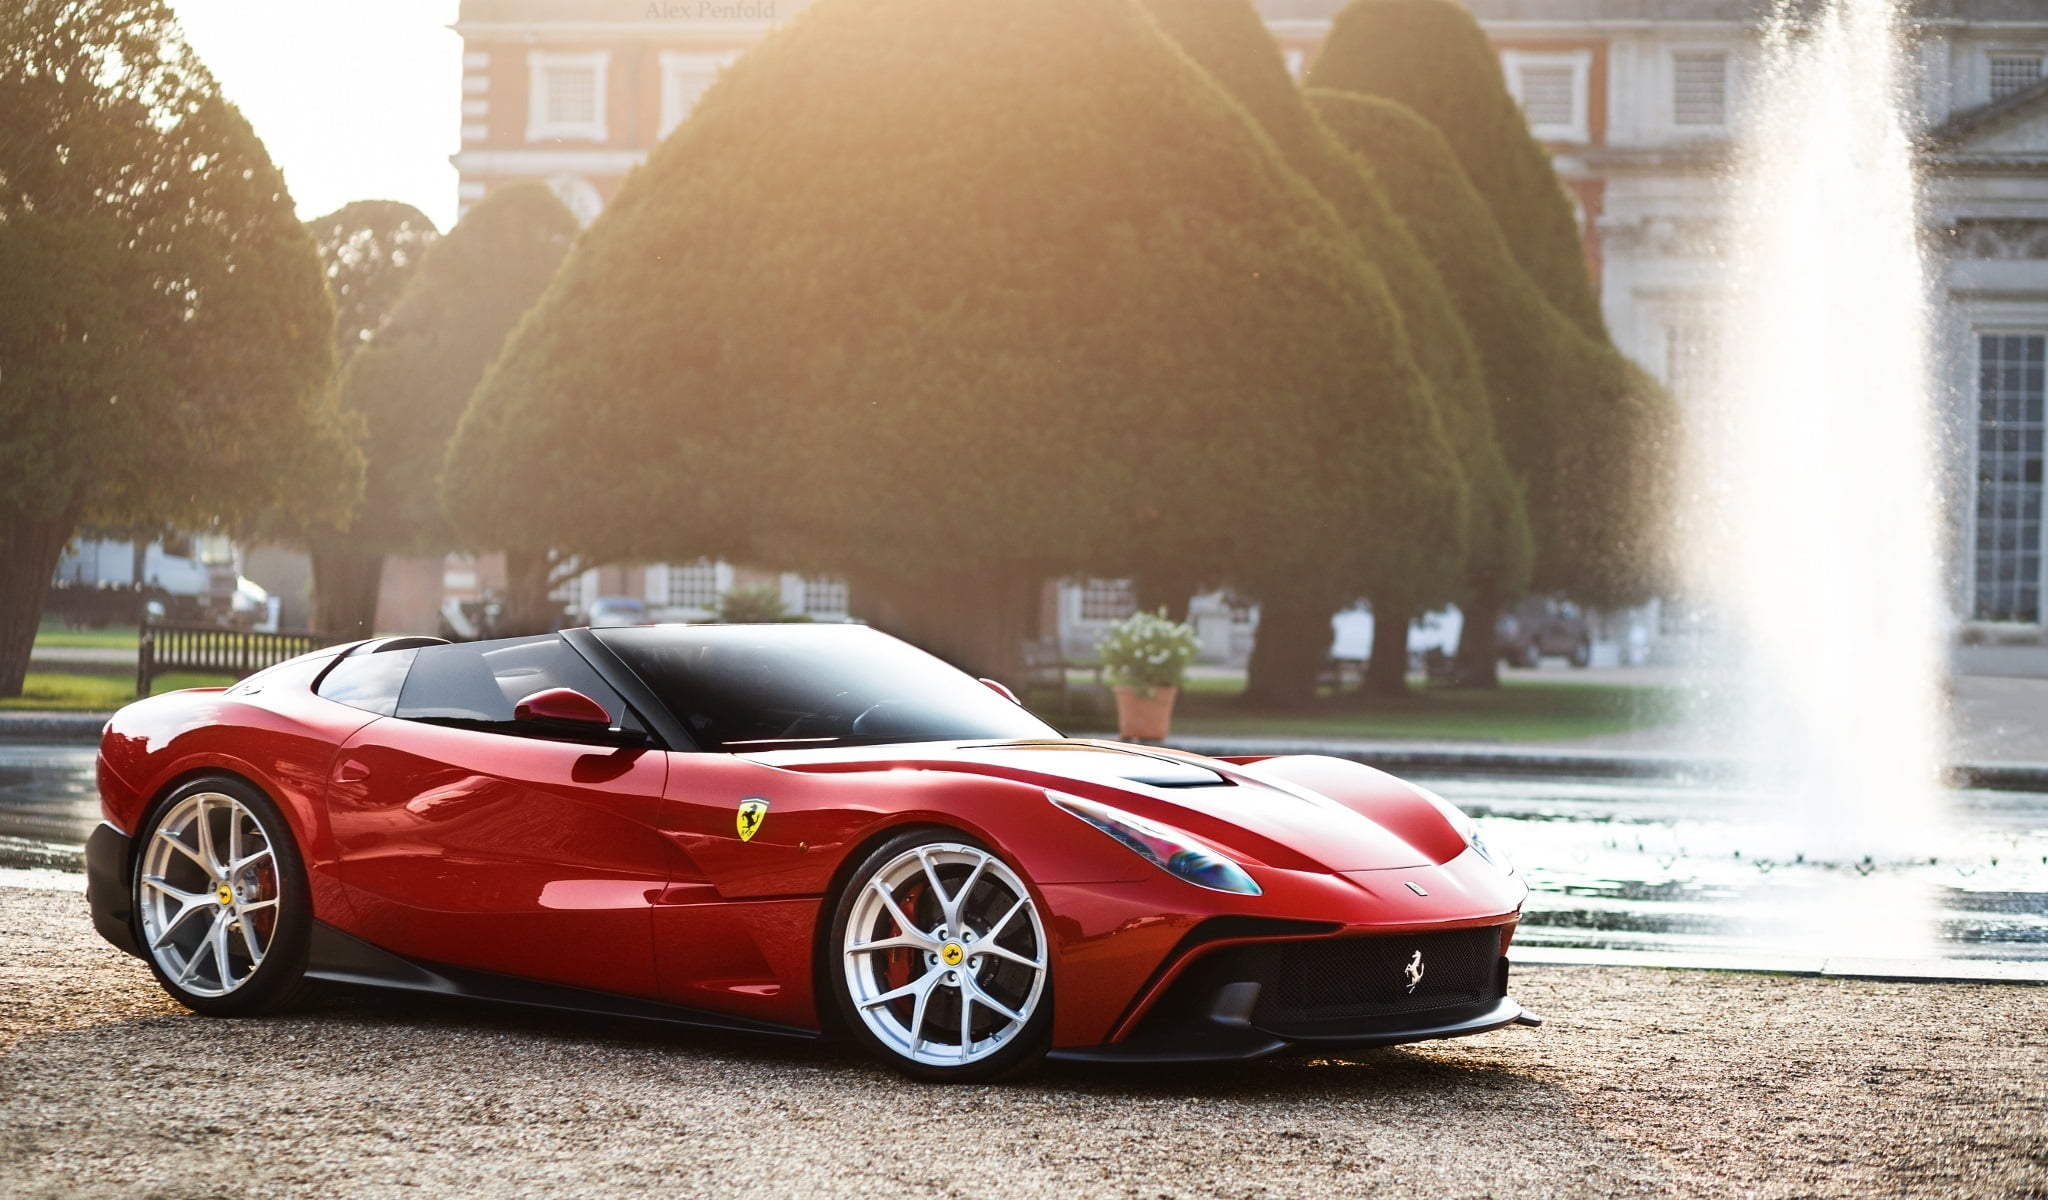 red Ferrari sports car, f12, trs, side view, luxury, outdoors